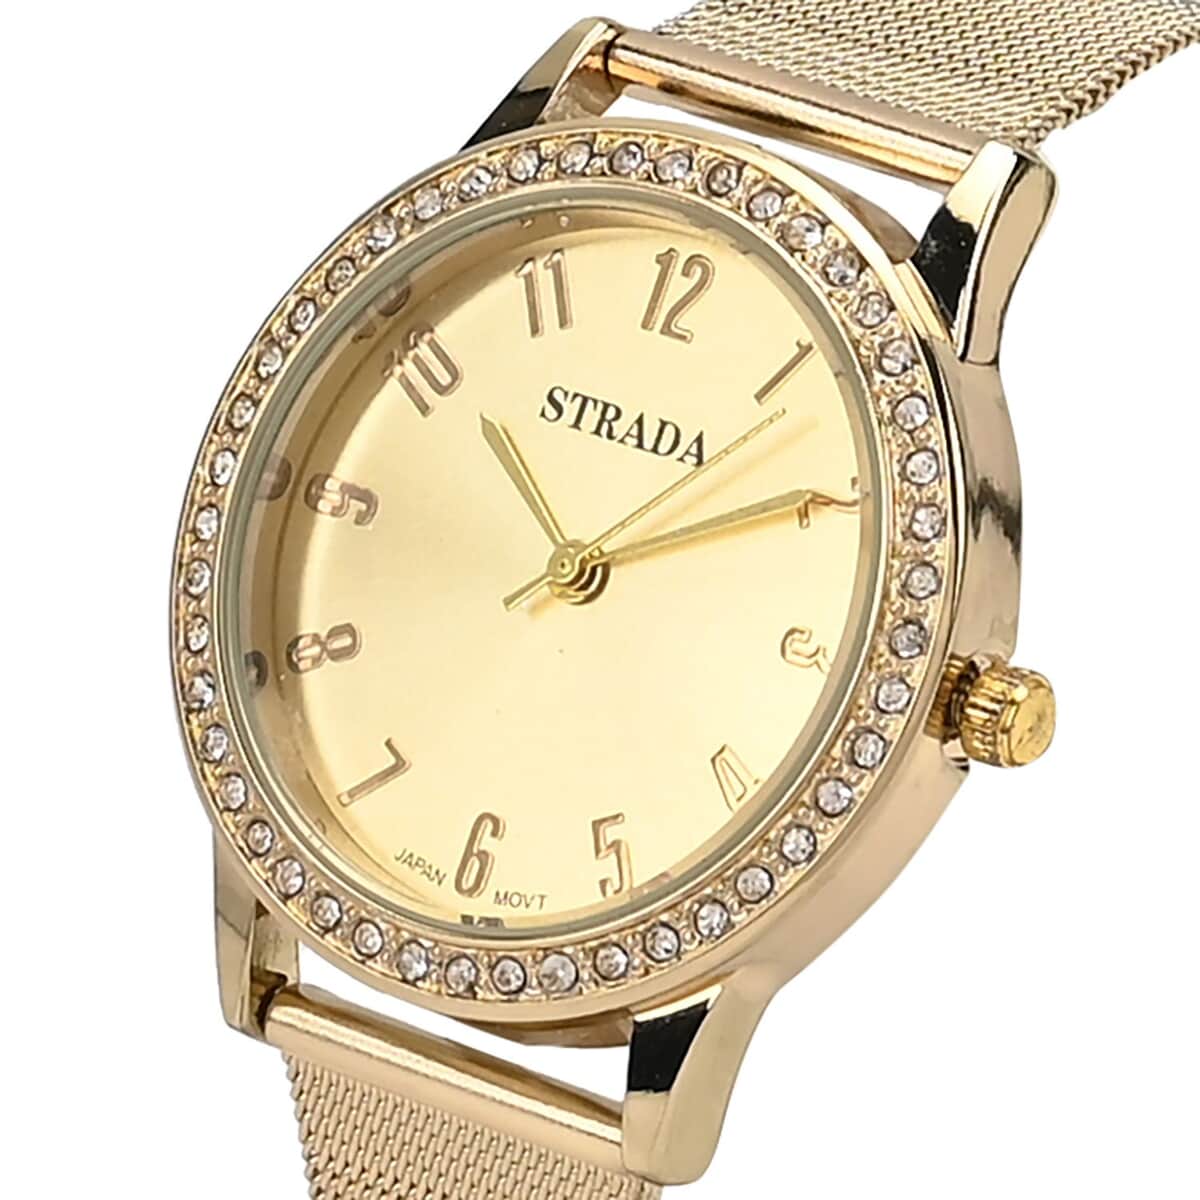 Strada White Austrian Crystal Japanese Movement Watch in Goldtone with Stainless Steel Mesh Belt Strap (36.06 mm) (6.50-7.50 Inches) image number 3